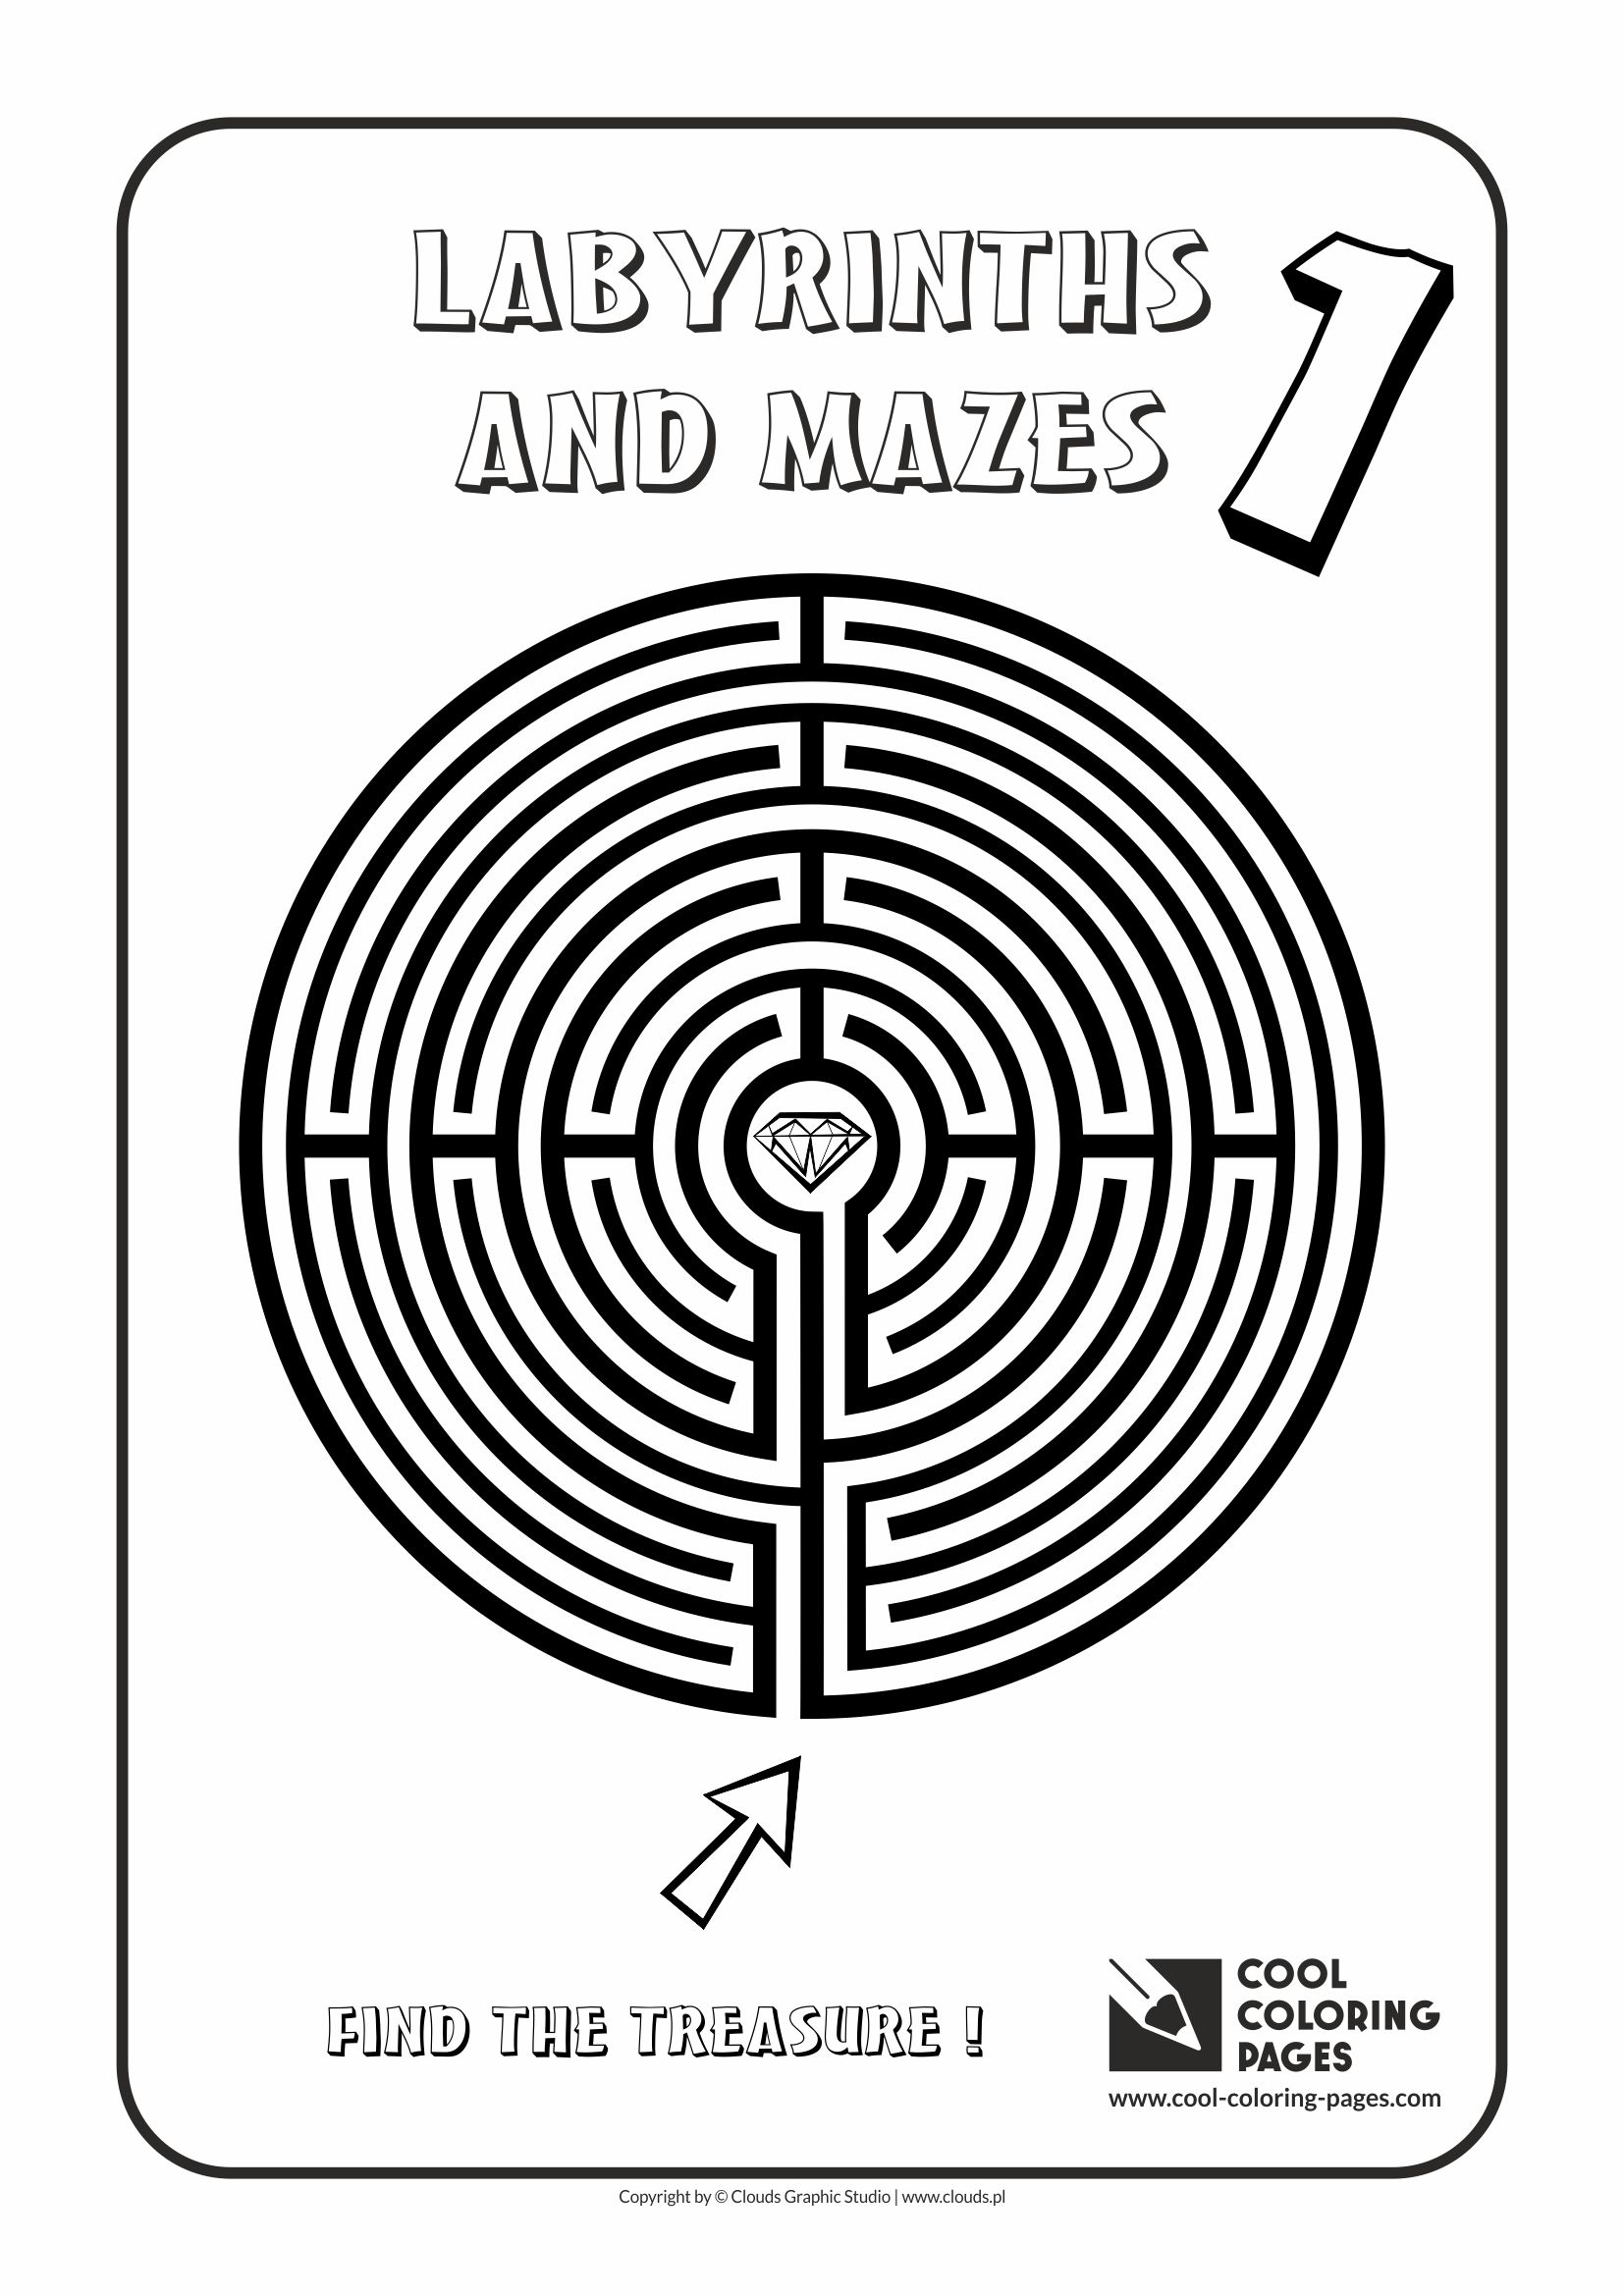 Cool Coloring Pages - Labyrinths and mazes / Maze no 1